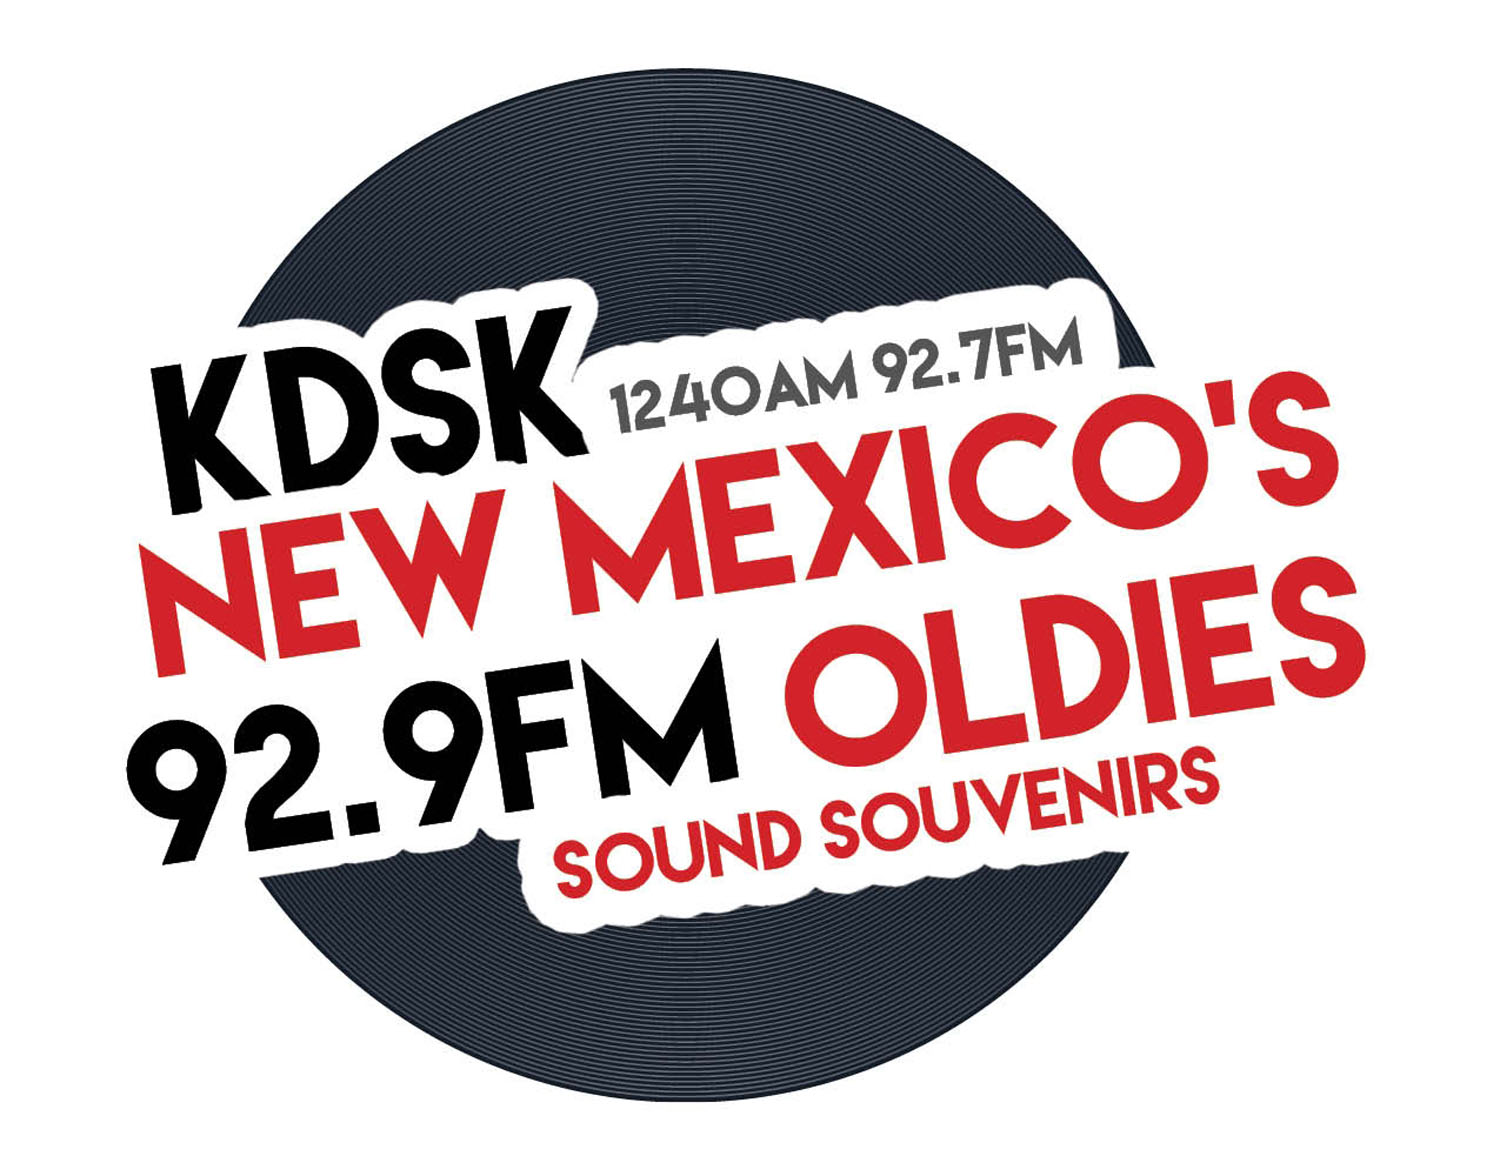 KDSK 92.7 - Sound Souvenir Music from the 50's, 60's, 70's and 80's!